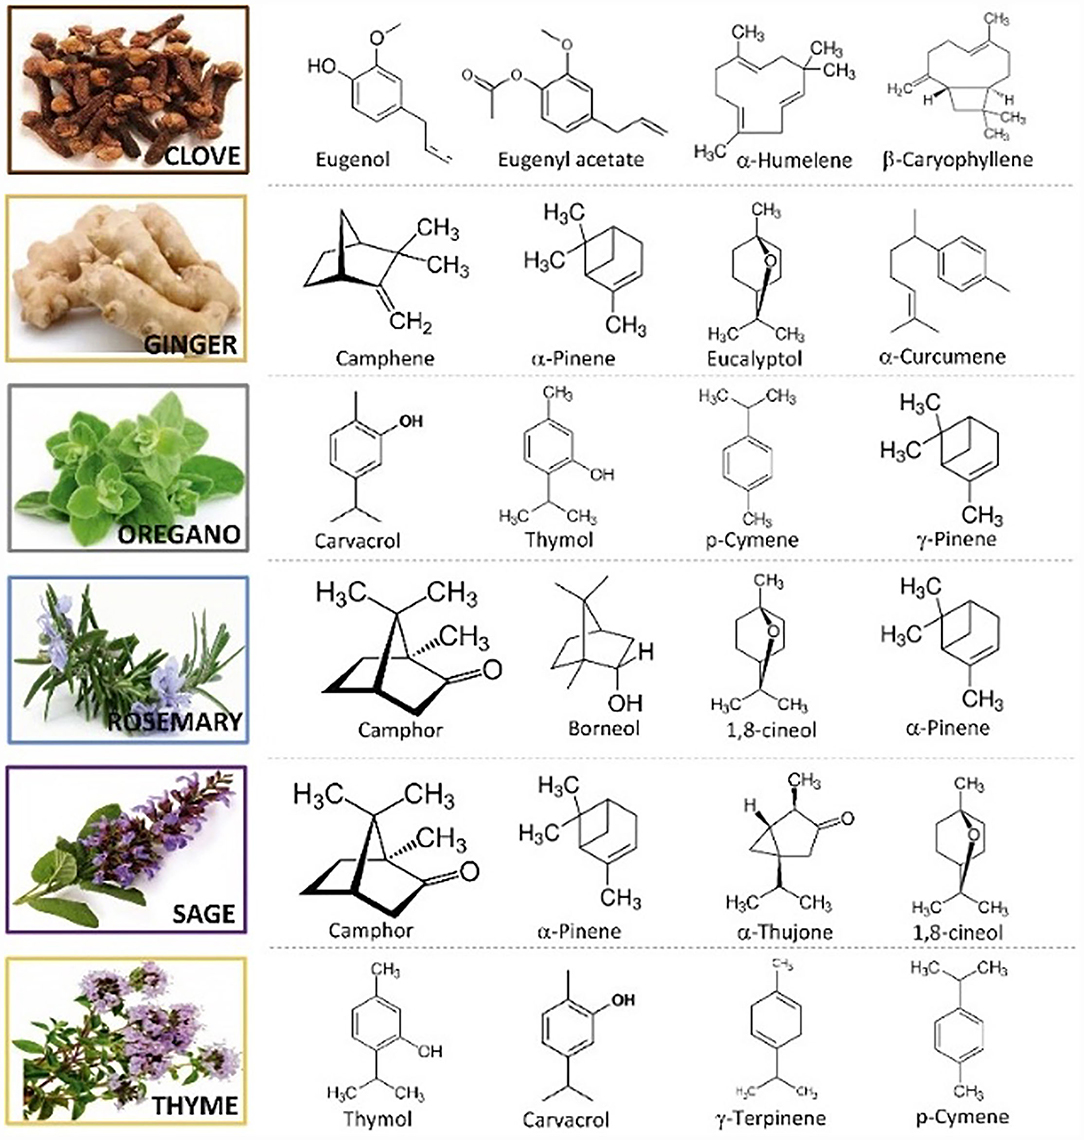 Frontiers  Biocontrol Potential of Essential Oils in Organic Horticulture  Systems: From Farm to Fork